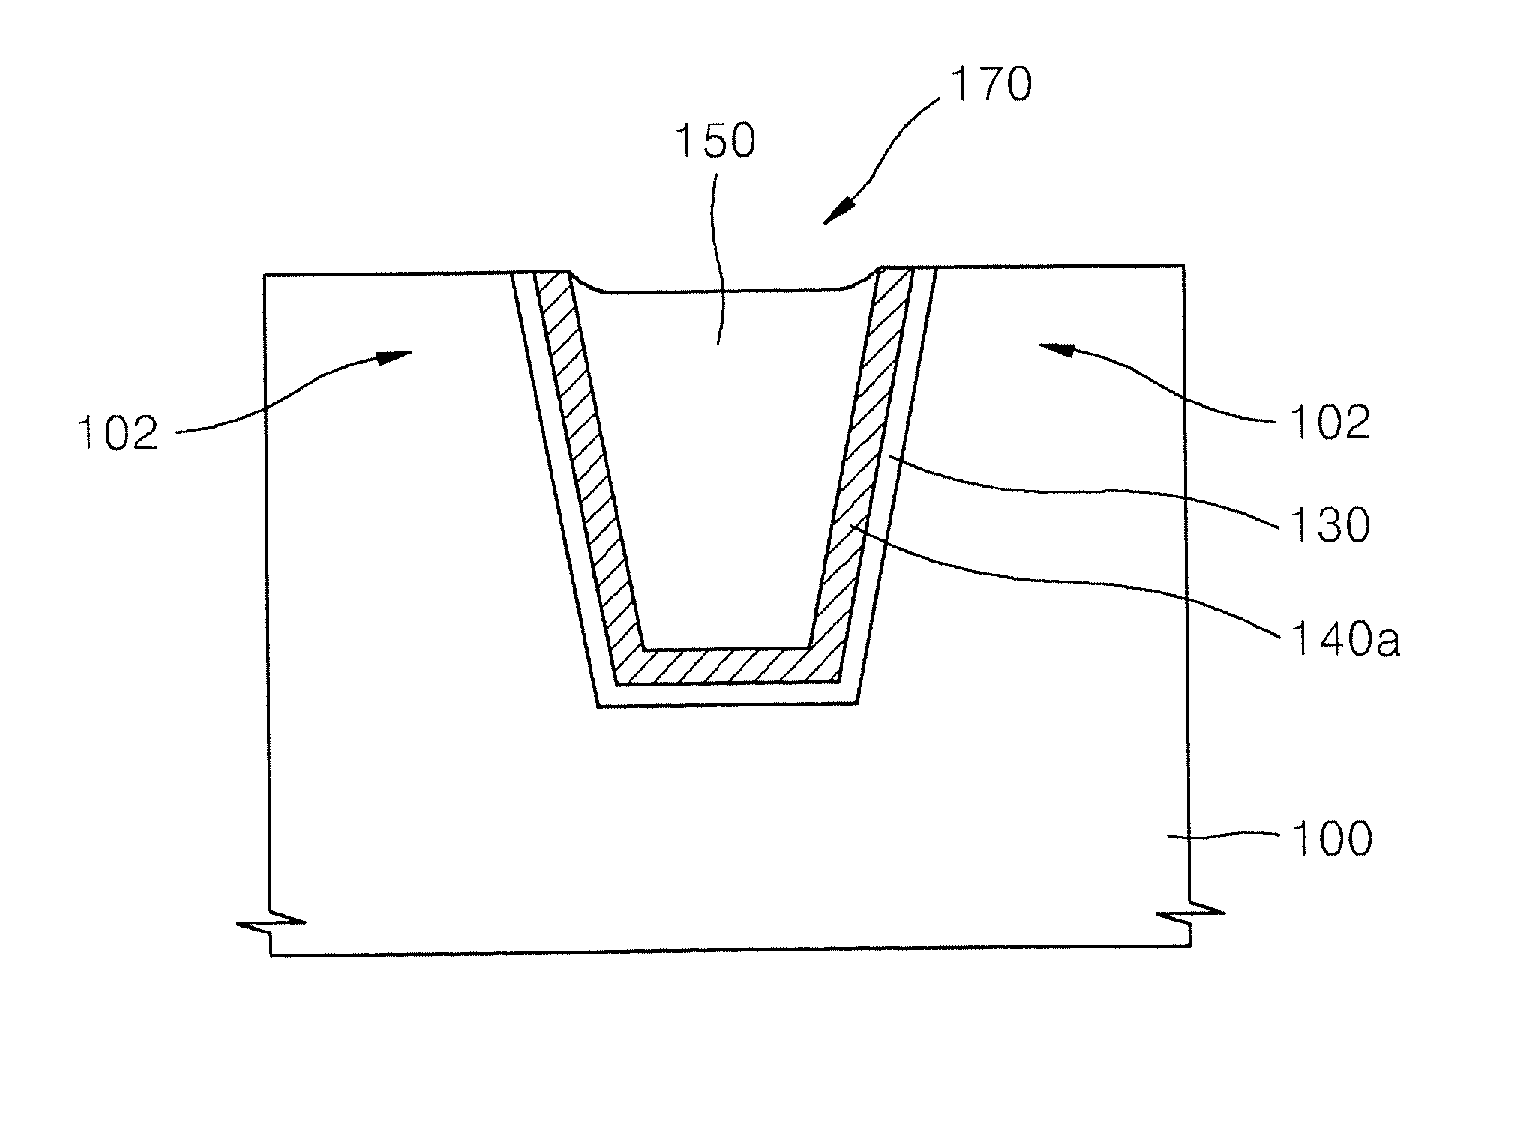 Shallow trench isolation structures for semiconductor devices including doped oxide film liners and methods of manufacturing the same